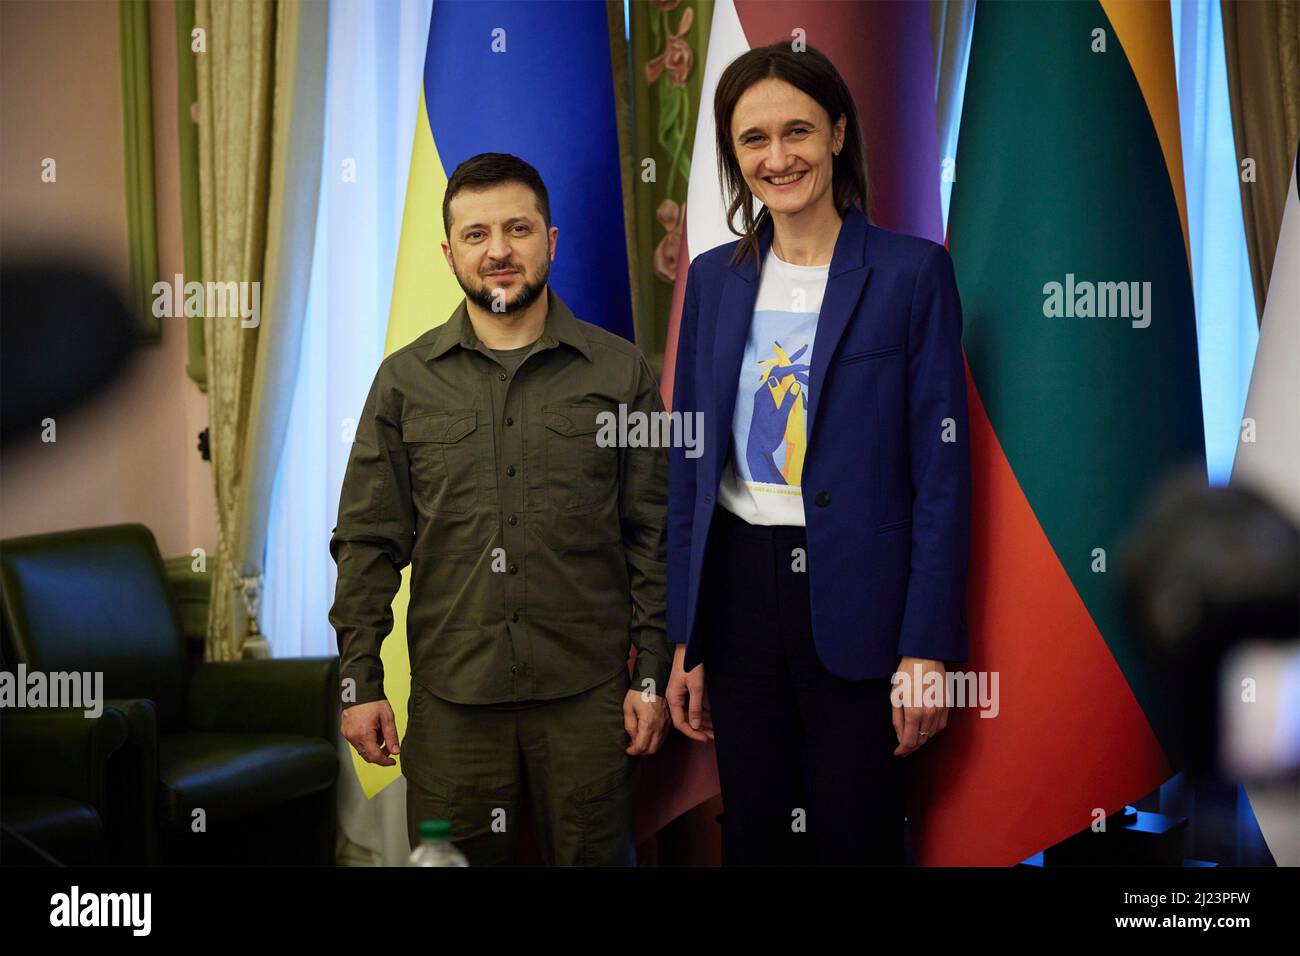 Kyiv, Ukraine. 24 March, 2022. Ukrainian President Volodymyr Zelenskyy, poses with the Speaker of the Lithuanian Seimas Viktorija Cmilyte-Nielsen, following meetings with parliamentarians from the Baltic nations, March 24, 2022 in Kyiv, Ukraine.    Credit: Ukraine Presidency/Ukraine Presidency/Alamy Live News Stock Photo